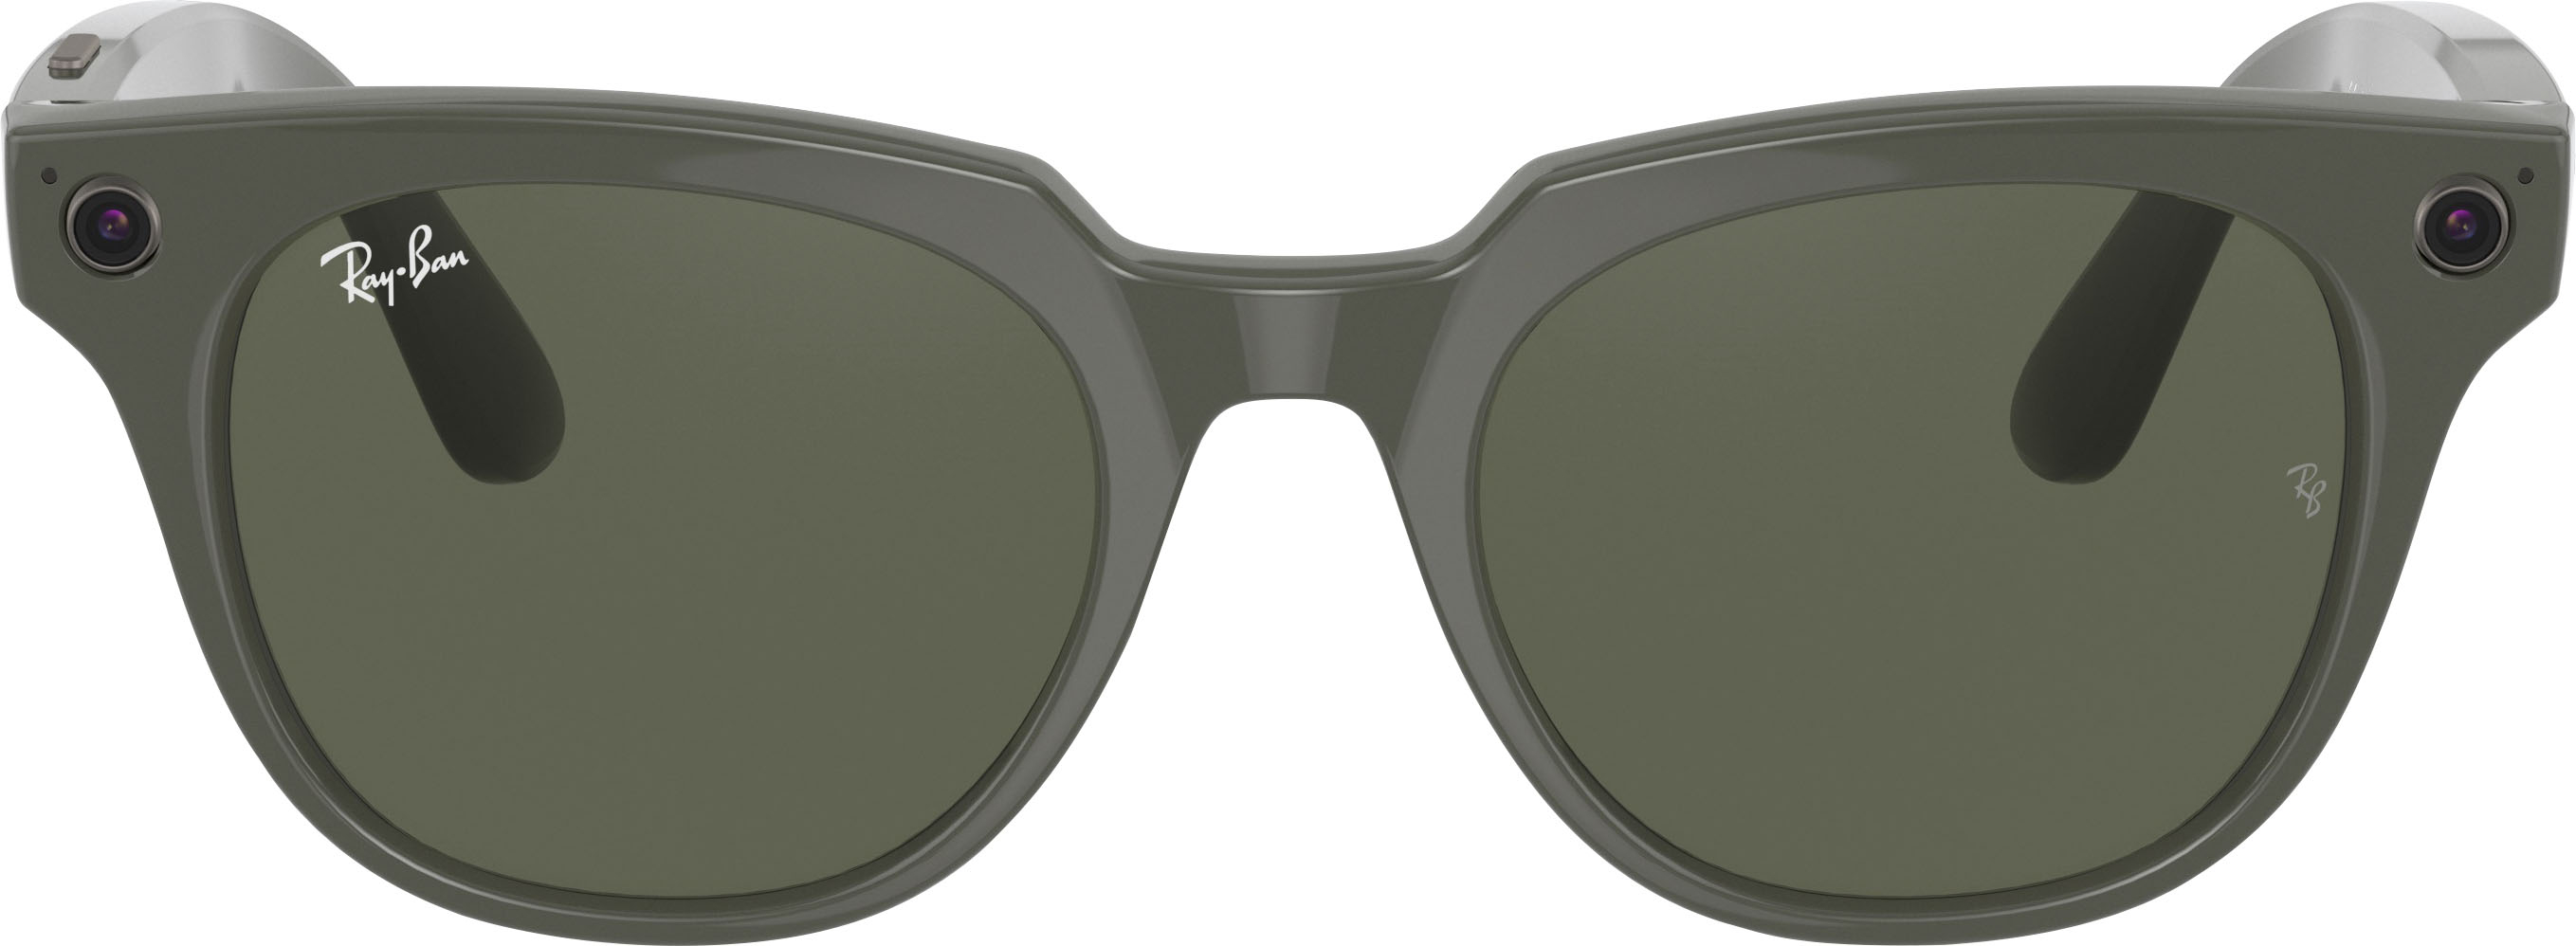 Angle View: Ray-Ban - Stories Meteor Smart Glasses - Shiny Olive/Transitions G-15  Green